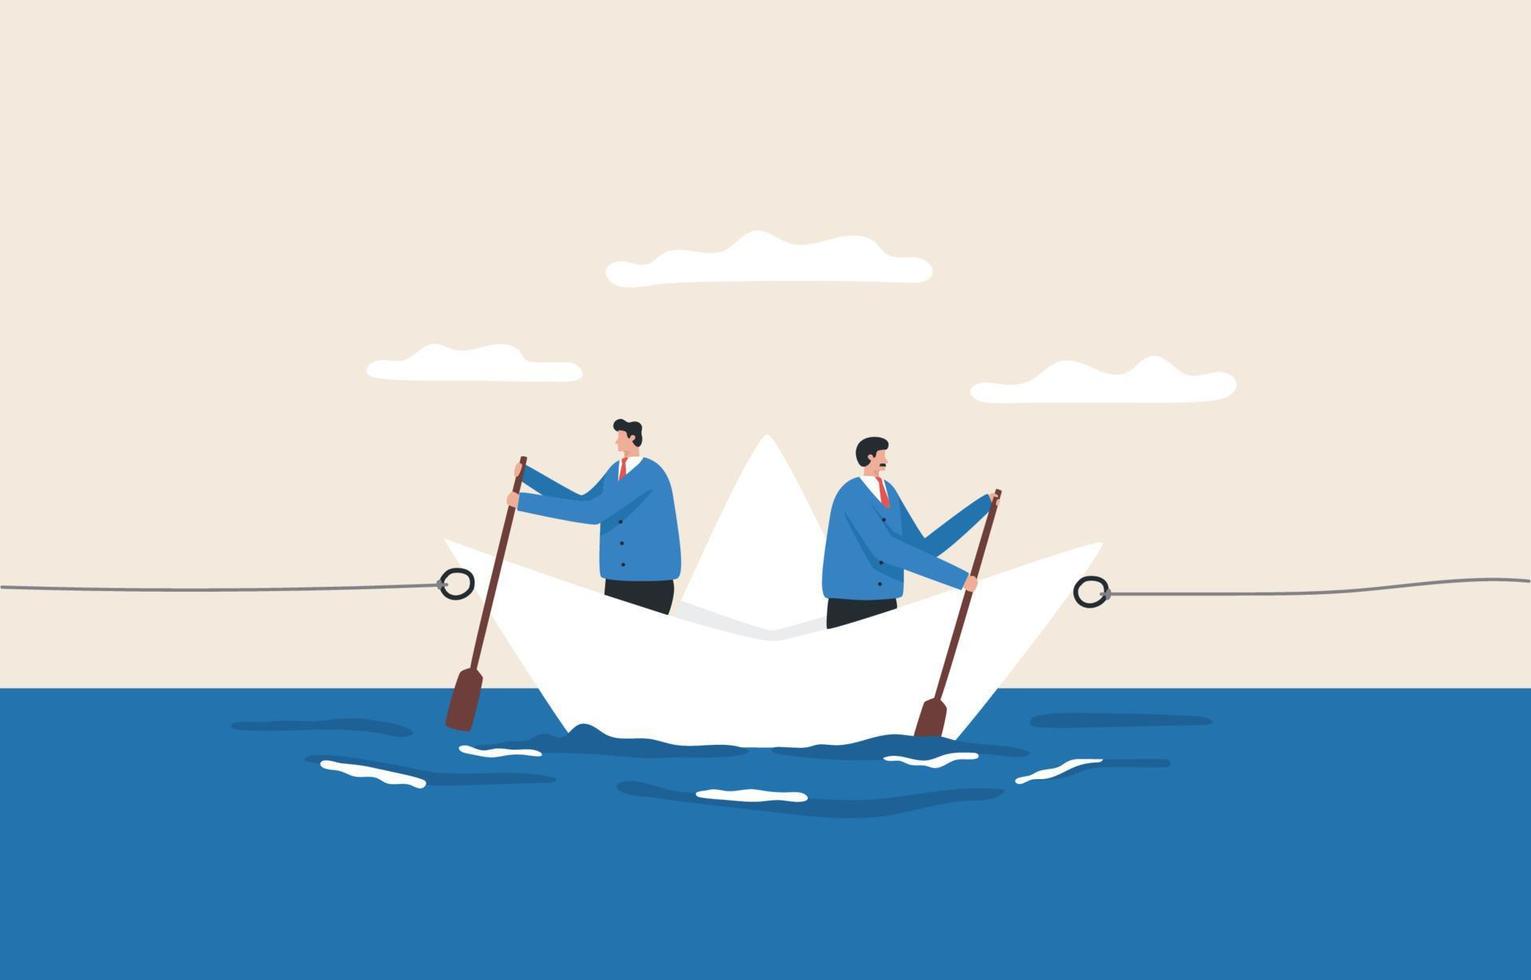 Choosing the direction of the business. Different opinions. Two choices that must be decided.  Two men rowing in opposite direction. vector